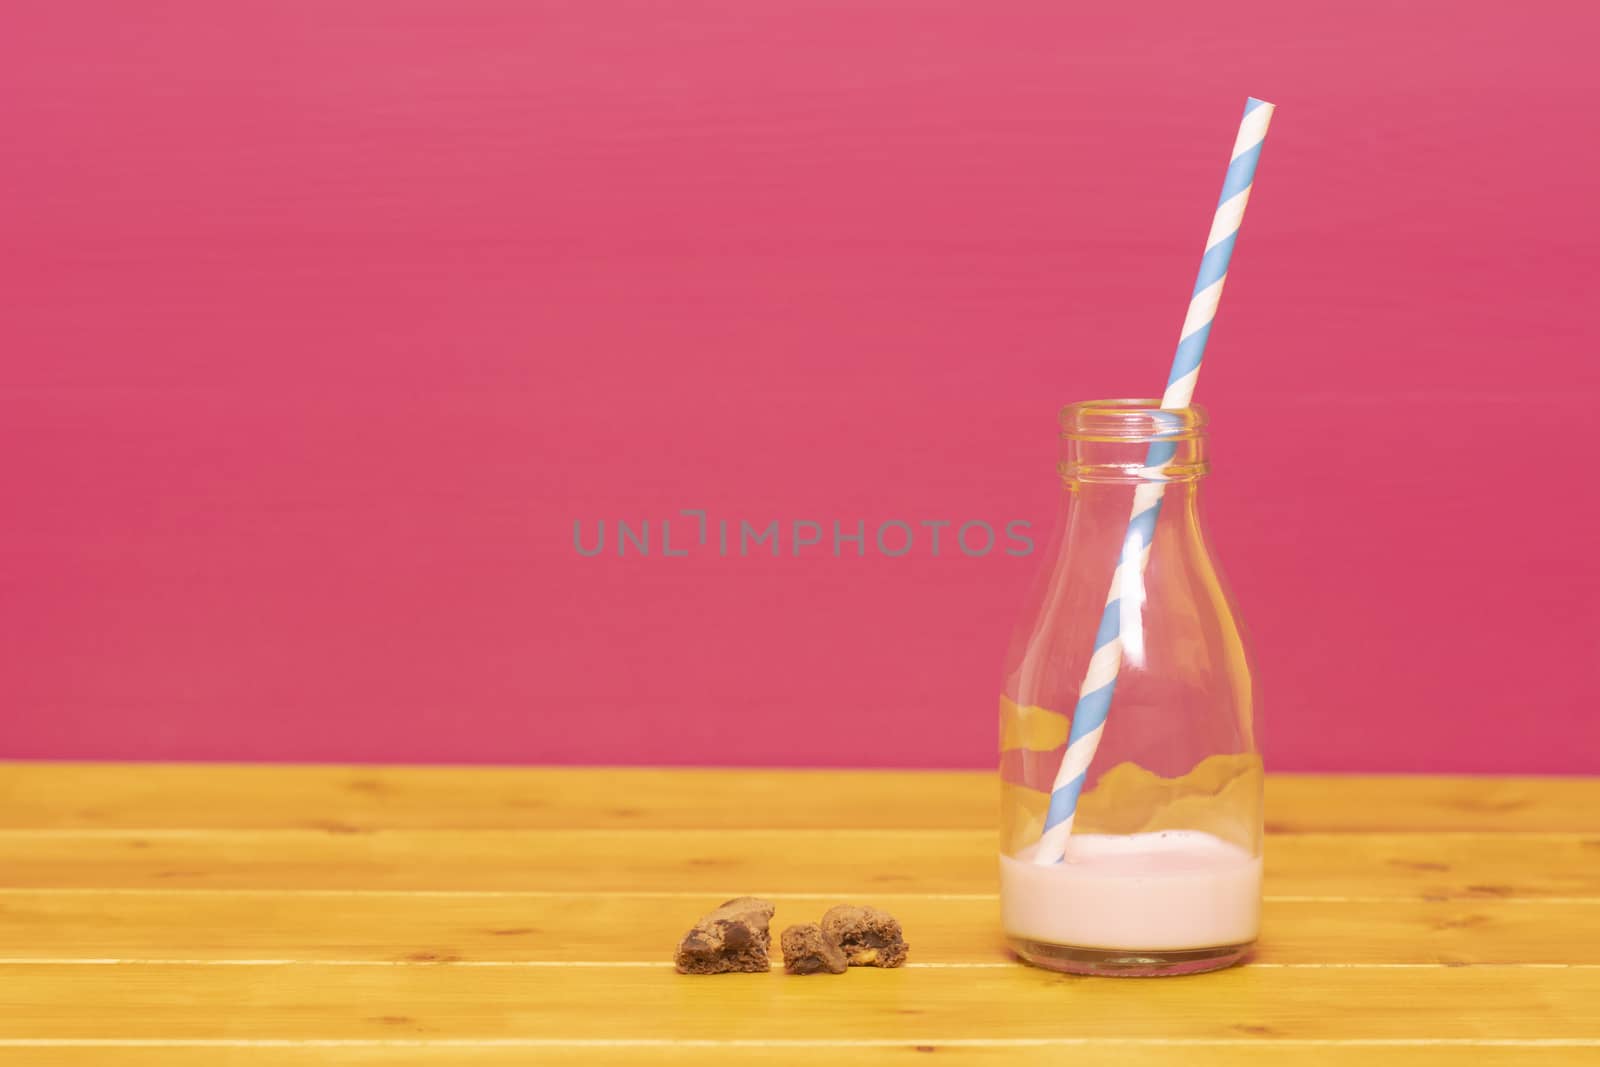 One-third pint glass milk bottle half full with strawberry milkshake with a retro straw and chocolate chip cookie crumbs, on a wooden table against a pink background